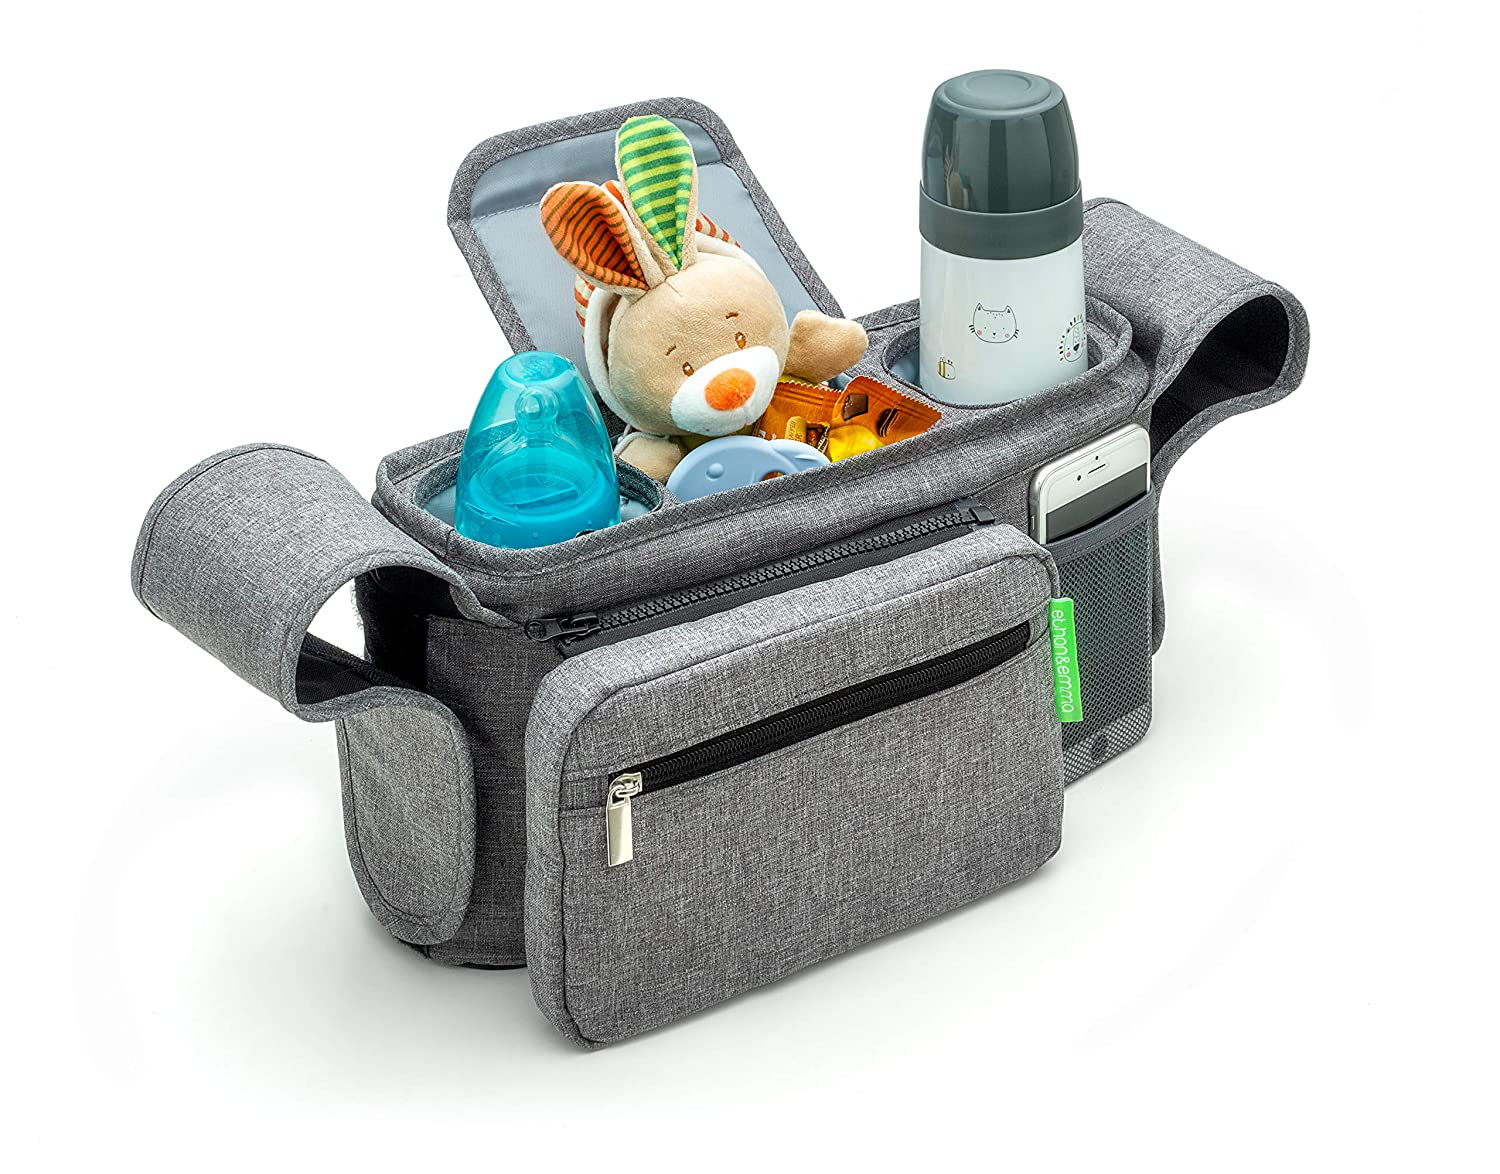 Buy Britax Car Seat Organizer Caddy with Insulated Cup Holders